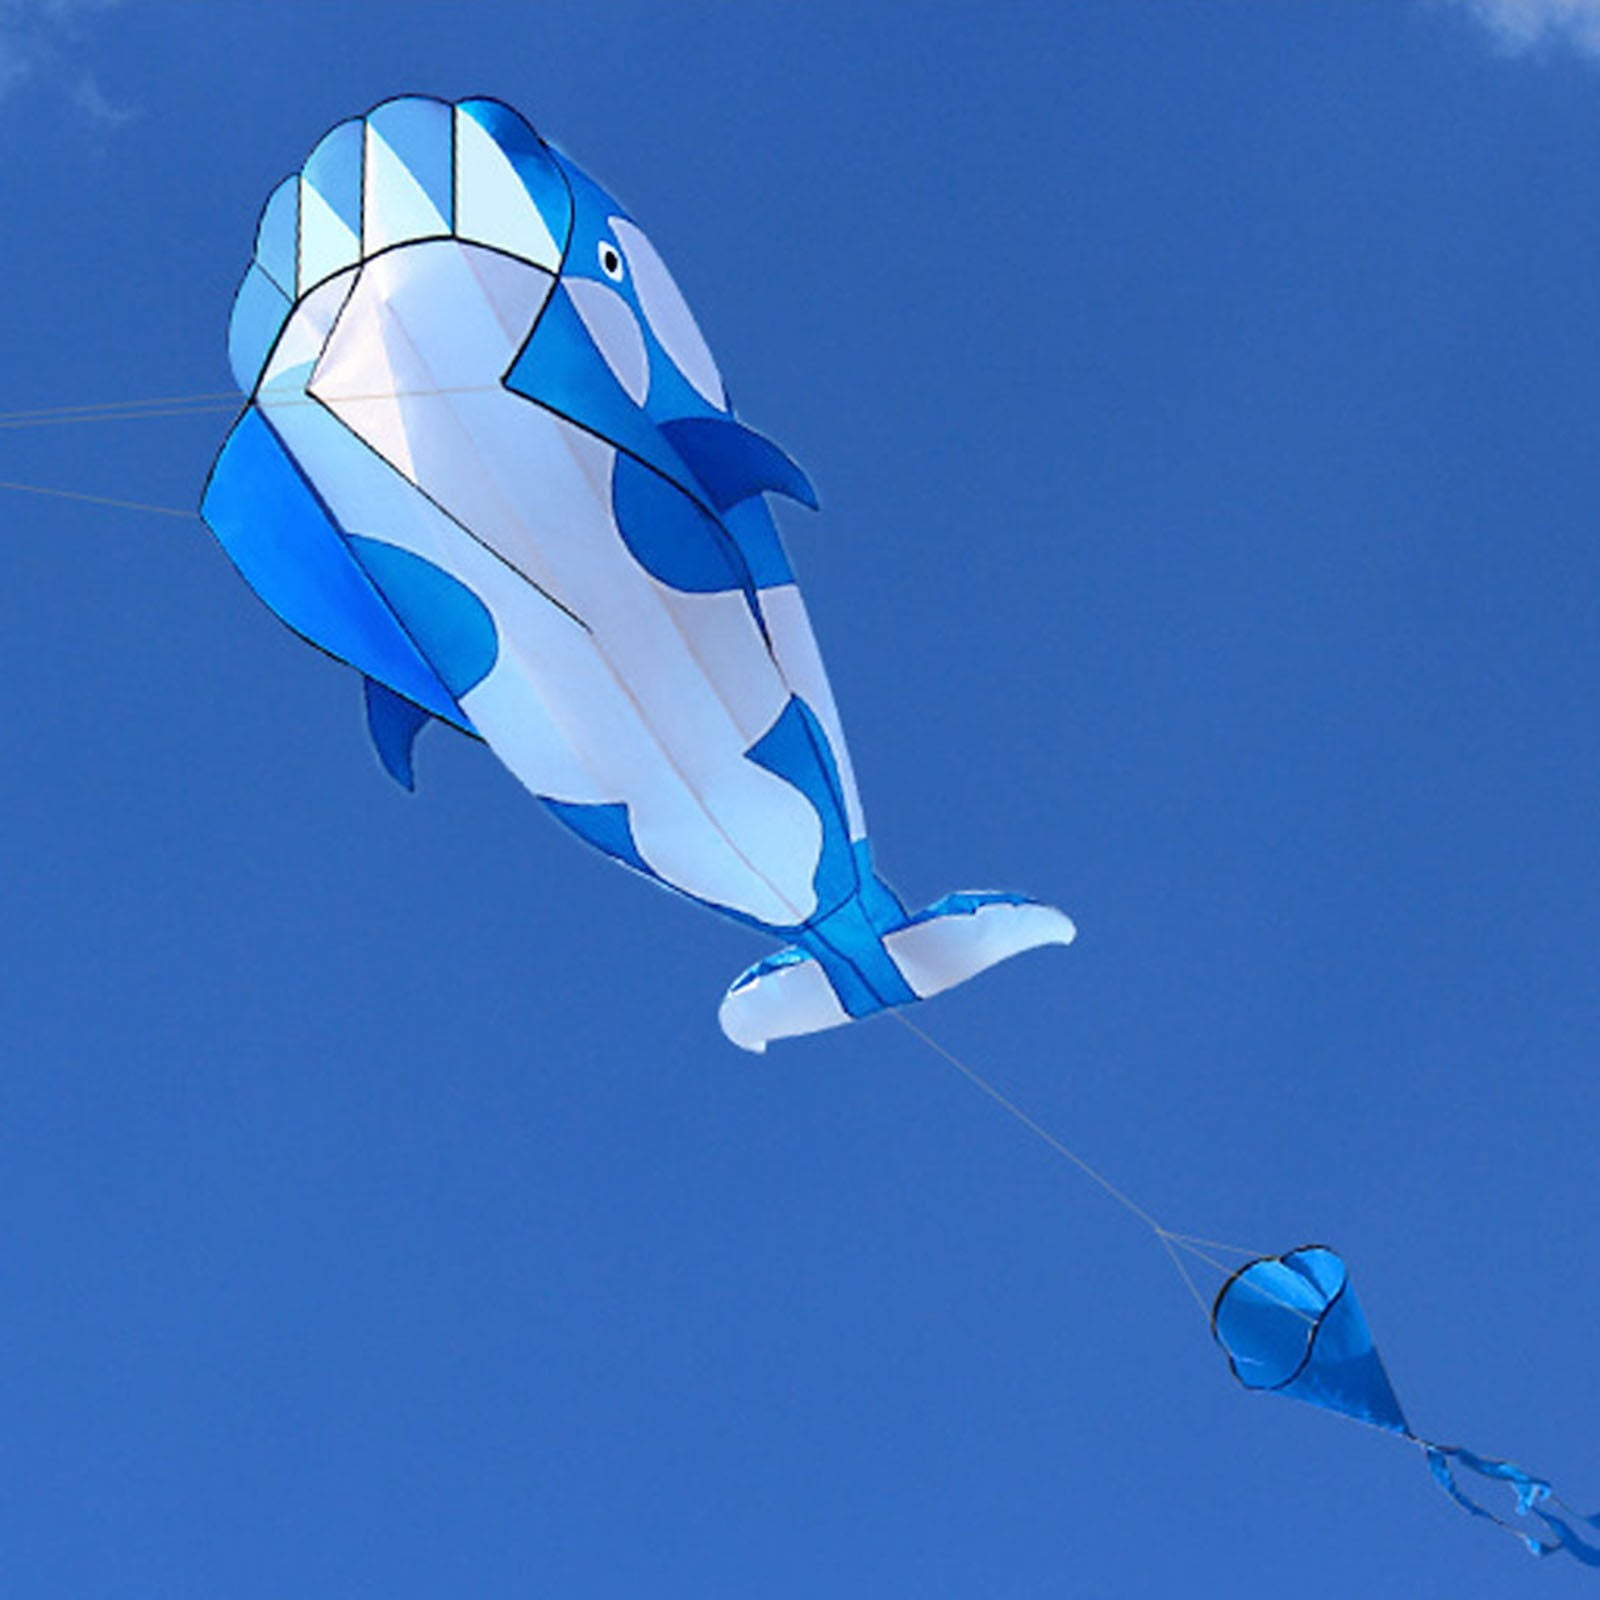 BLUE 1.2m High Quality Outdoor Fun Sports Animal Fish Kites with handle for kids 